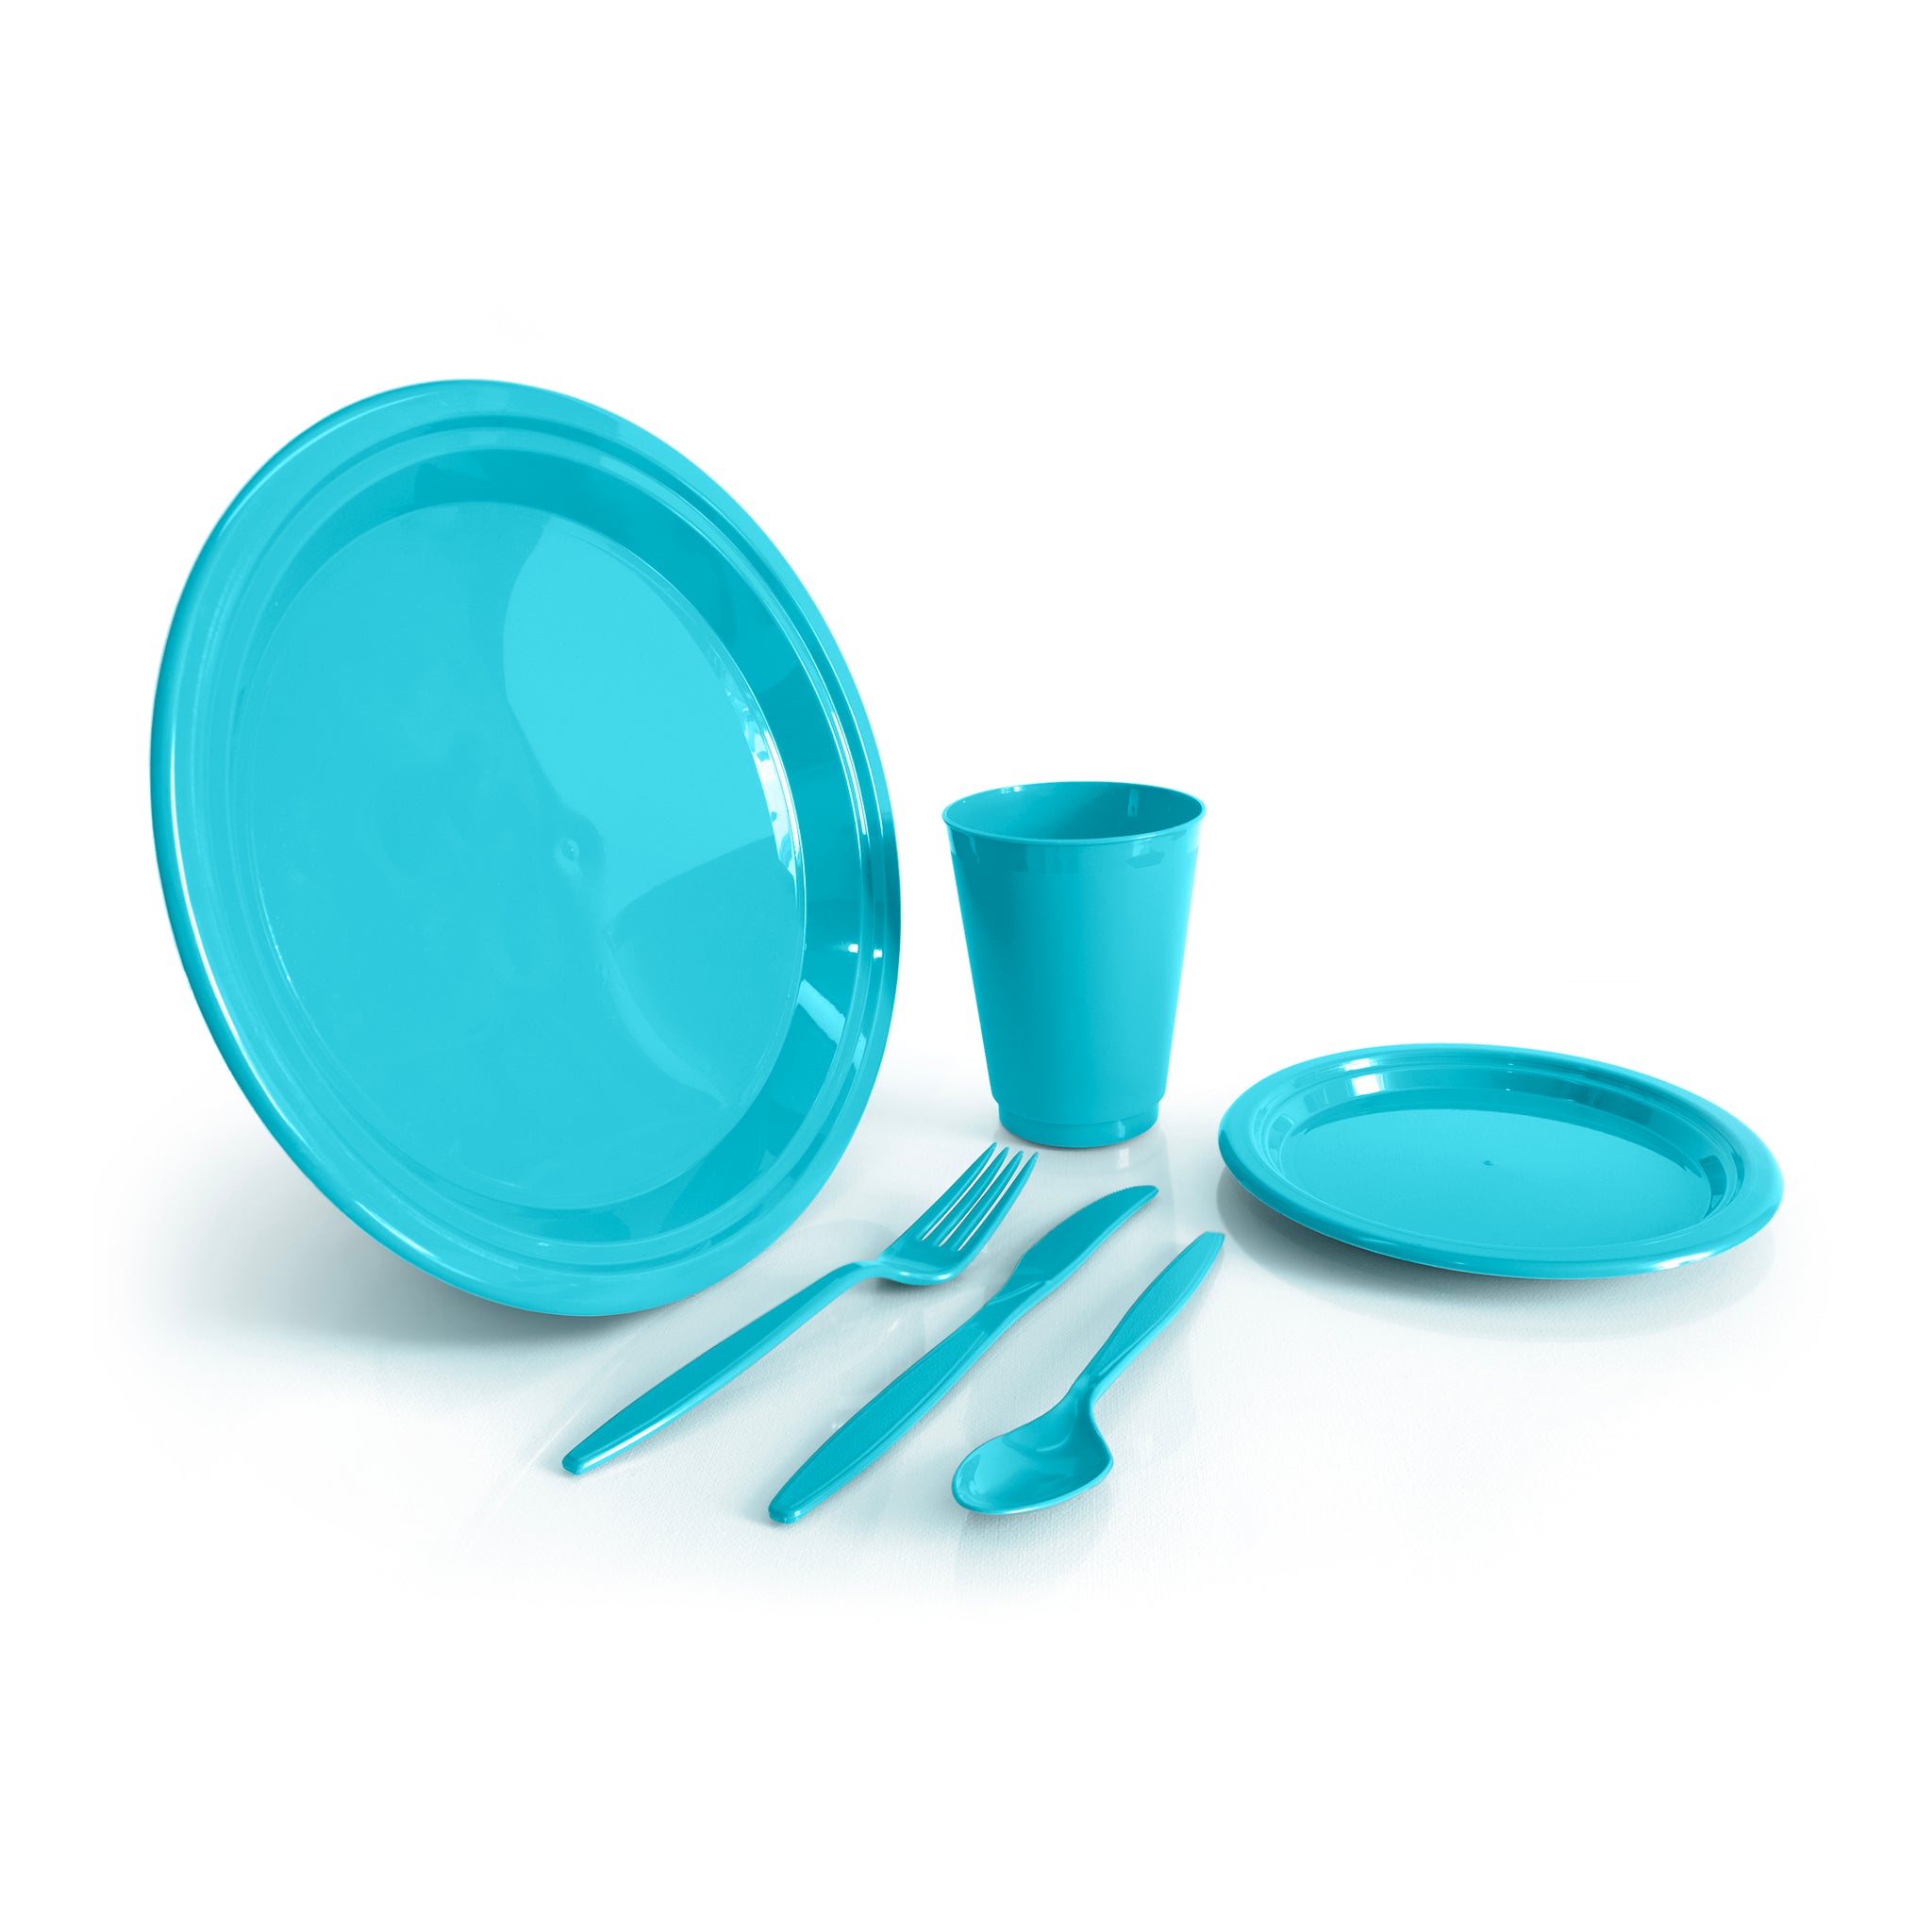 Recycled plastic plates, cups and cutlery